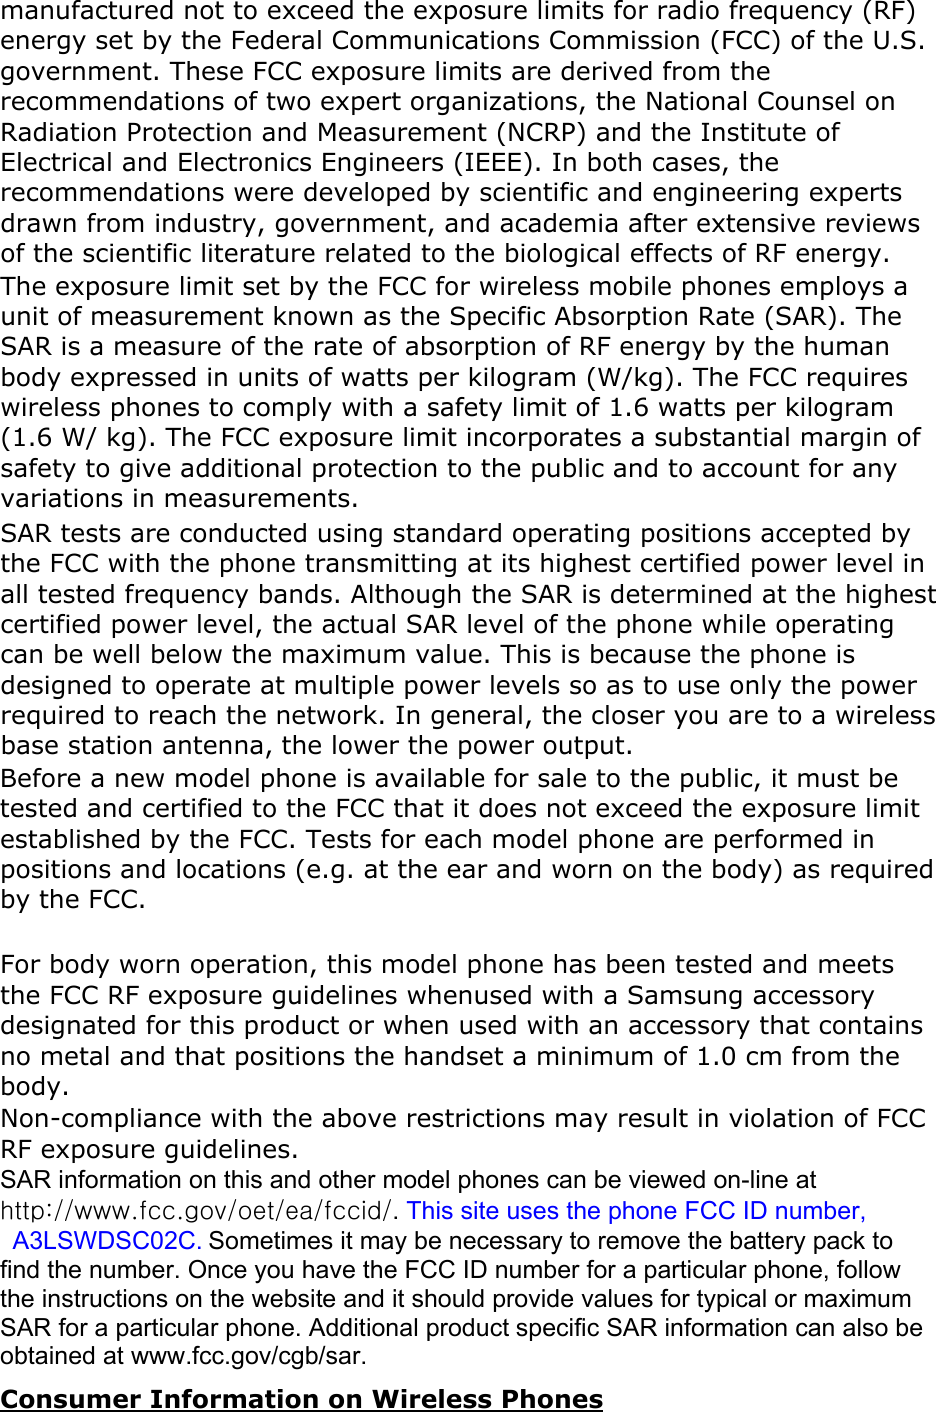 manufactured not to exceed the exposure limits for radio frequency (RF) energy set by the Federal Communications Commission (FCC) of the U.S. government. These FCC exposure limits are derived from the recommendations of two expert organizations, the National Counsel on Radiation Protection and Measurement (NCRP) and the Institute of Electrical and Electronics Engineers (IEEE). In both cases, the recommendations were developed by scientific and engineering experts drawn from industry, government, and academia after extensive reviews of the scientific literature related to the biological effects of RF energy.The exposure limit set by the FCC for wireless mobile phones employs a unit of measurement known as the Specific Absorption Rate (SAR). The SAR is a measure of the rate of absorption of RF energy by the human body expressed in units of watts per kilogram (W/kg). The FCC requires wireless phones to comply with a safety limit of 1.6 watts per kilogram (1.6 W/ kg). The FCC exposure limit incorporates a substantial margin of safety to give additional protection to the public and to account for any variations in measurements.SAR tests are conducted using standard operating positions accepted by the FCC with the phone transmitting at its highest certified power level in all tested frequency bands. Although the SAR is determined at the highest certified power level, the actual SAR level of the phone while operating can be well below the maximum value. This is because the phone is designed to operate at multiple power levels so as to use only the power required to reach the network. In general, the closer you are to a wireless base station antenna, the lower the power output. Before a new model phone is available for sale to the public, it must be tested and certified to the FCC that it does not exceed the exposure limit established by the FCC. Tests for each model phone are performed in positions and locations (e.g. at the ear and worn on the body) as required by the FCC.     For body worn operation, this model phone has been tested and meets the FCC RF exposure guidelines whenused with a Samsung accessory designated for this product or when used with an accessory that contains no metal and that positions the handset a minimum of 1.0 cm from the body.Non-compliance with the above restrictions may result in violation of FCC RF exposure guidelines. SAR information on this and other model phones can be viewed on-line at http://www.fcc.gov/oet/ea/fccid/.This site uses the phone FCC ID number,   A3LSWDSC02C. Sometimes it may be necessary to remove the battery pack to find the number. Once you have the FCC ID number for a particular phone, follow the instructions on the website and it should provide values for typical or maximum SAR for a particular phone. Additional product specific SAR information can also be obtained at www.fcc.gov/cgb/sar. Consumer Information on Wireless Phones